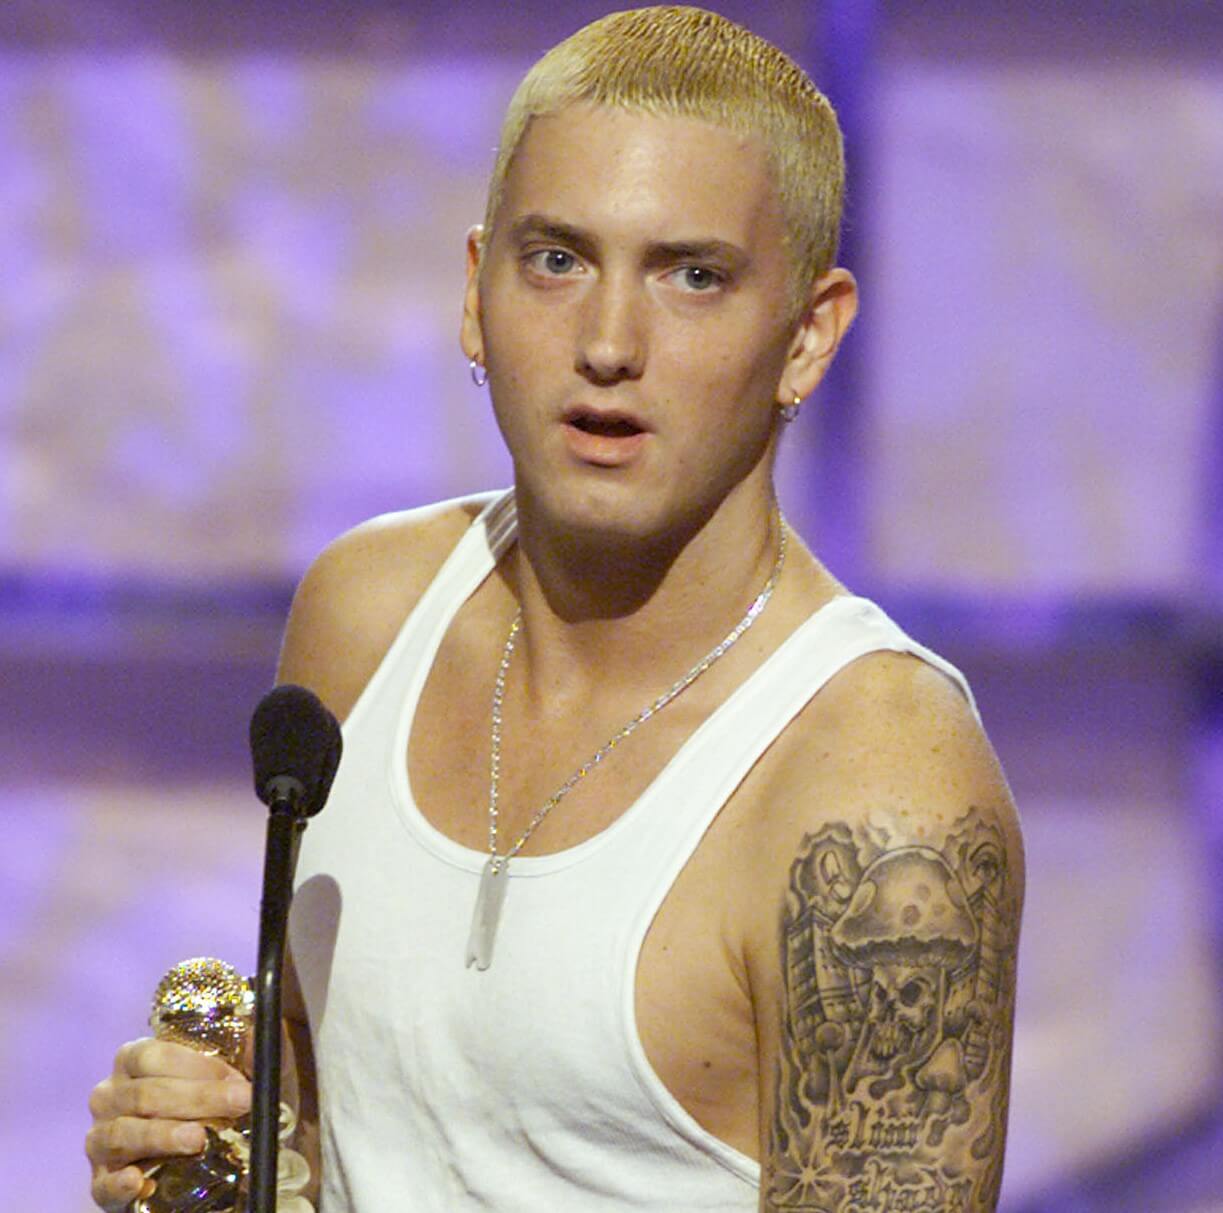 Eminem, known for his Slim Shady persona, with yellow hair